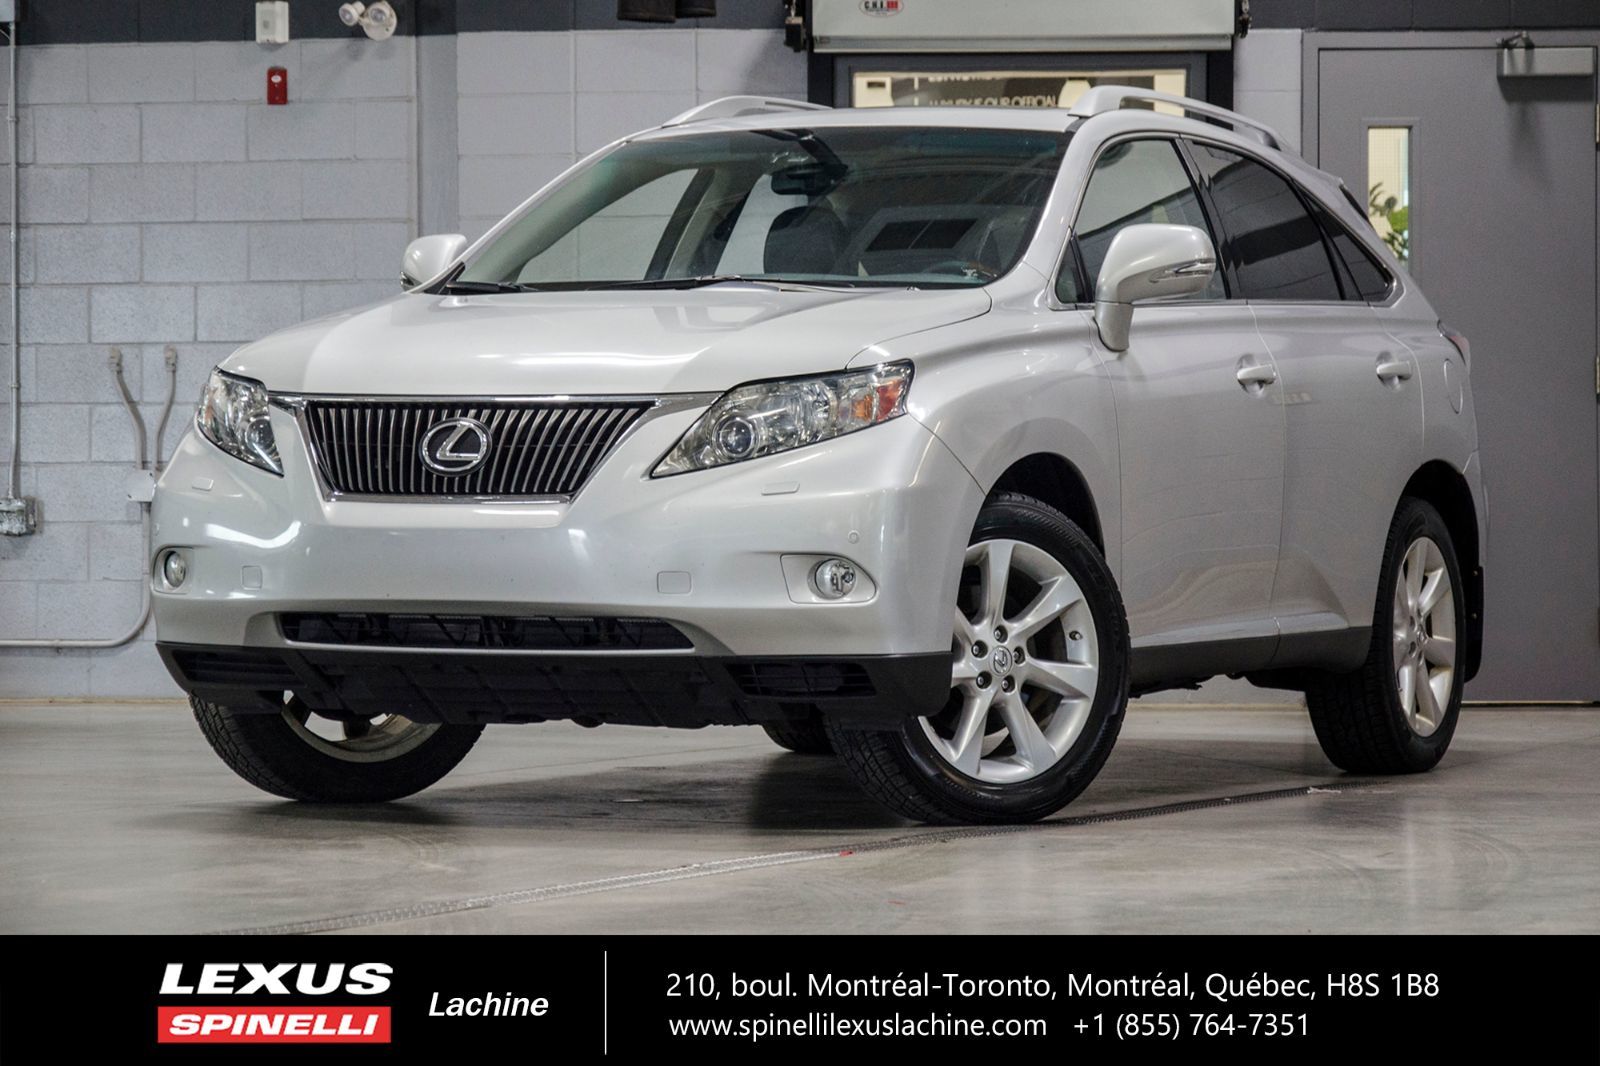 Used 2011 Lexus RX 350 *** RÉSERVÉ / ON HOLD *** in